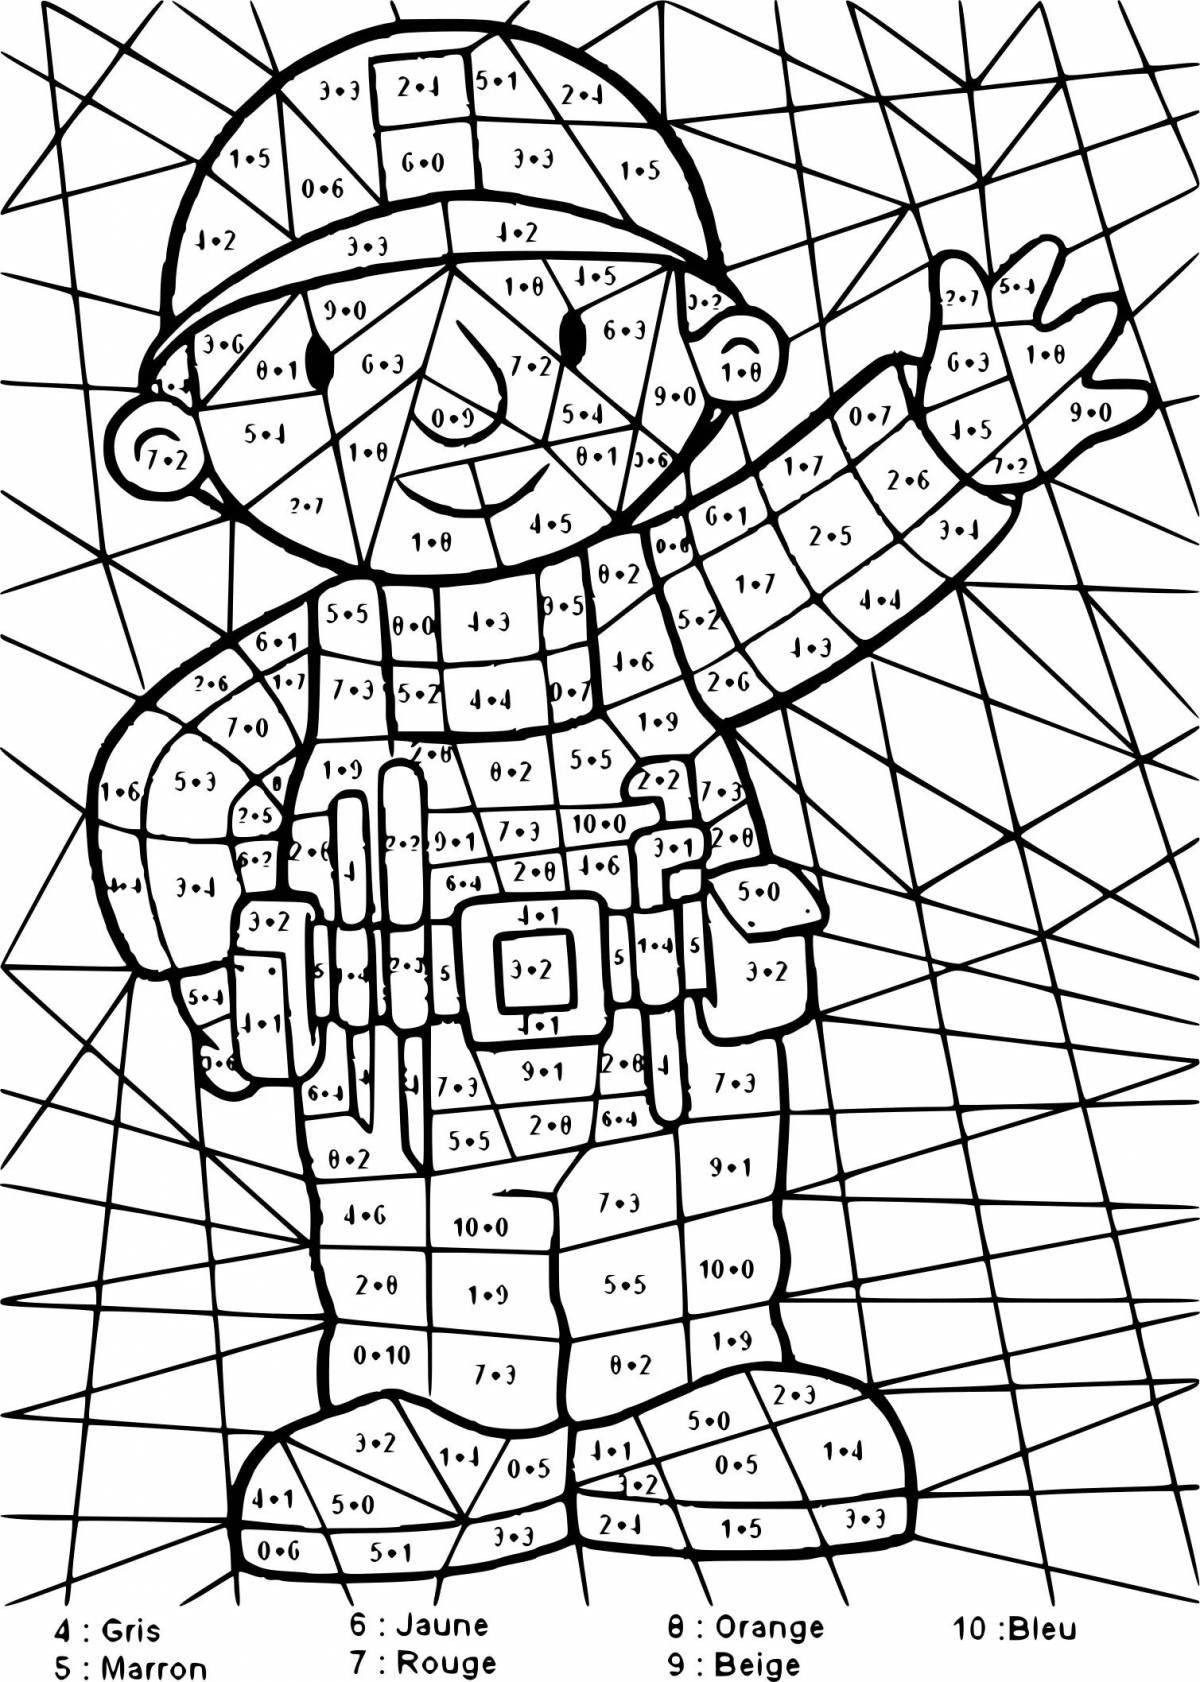 Colorful-fantasy coloring page by numbers February 23